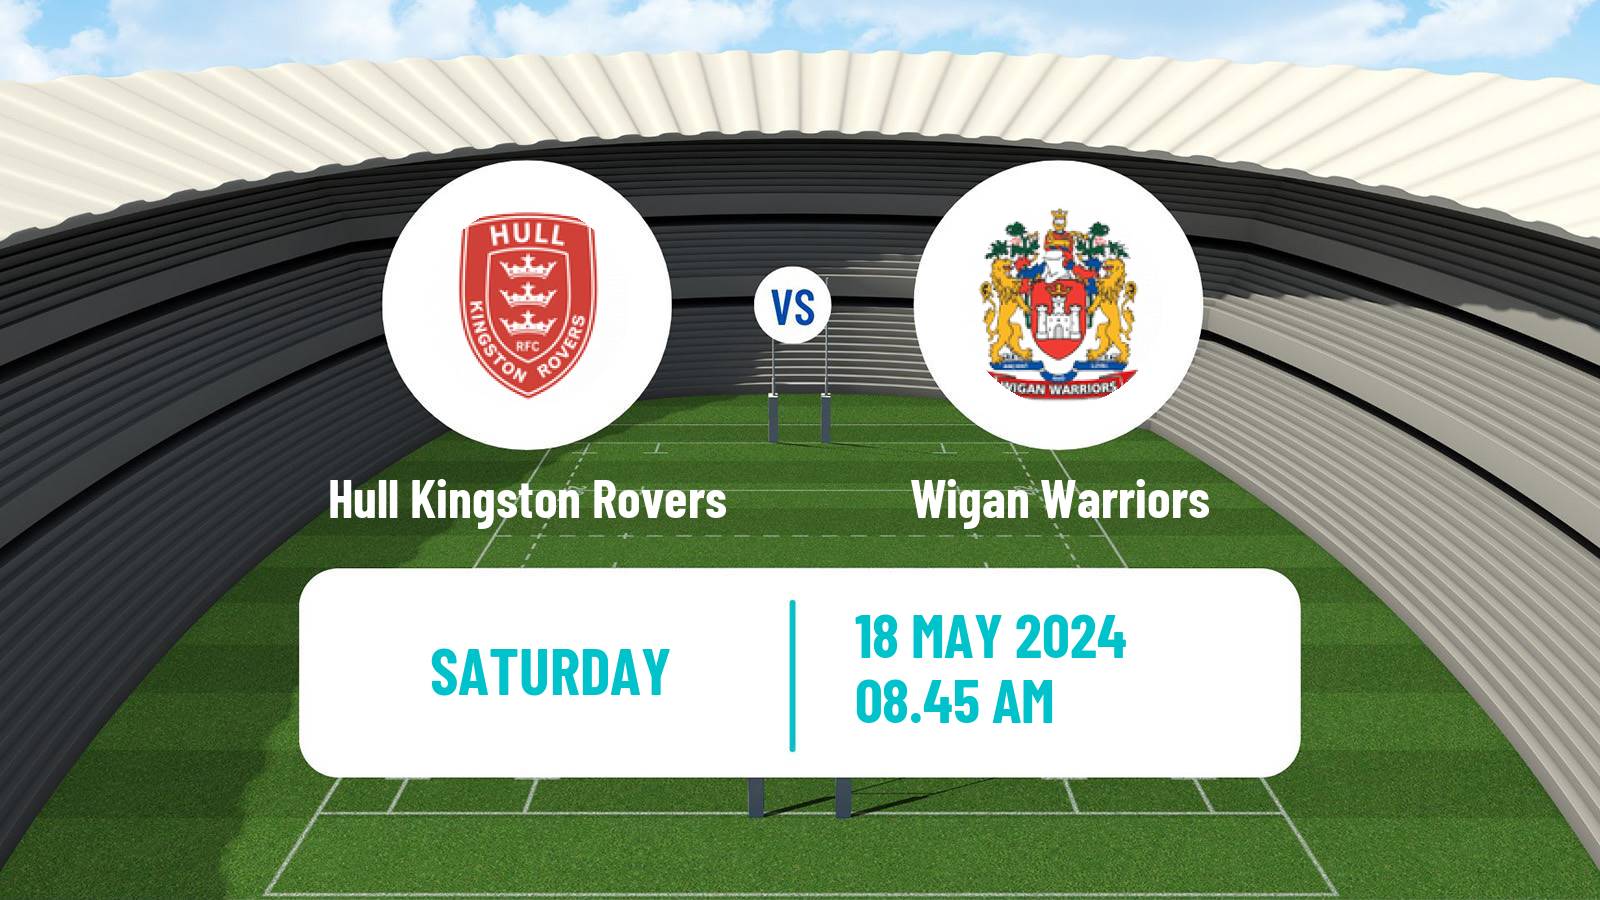 Rugby league Challenge Cup Rugby League Hull Kingston Rovers - Wigan Warriors